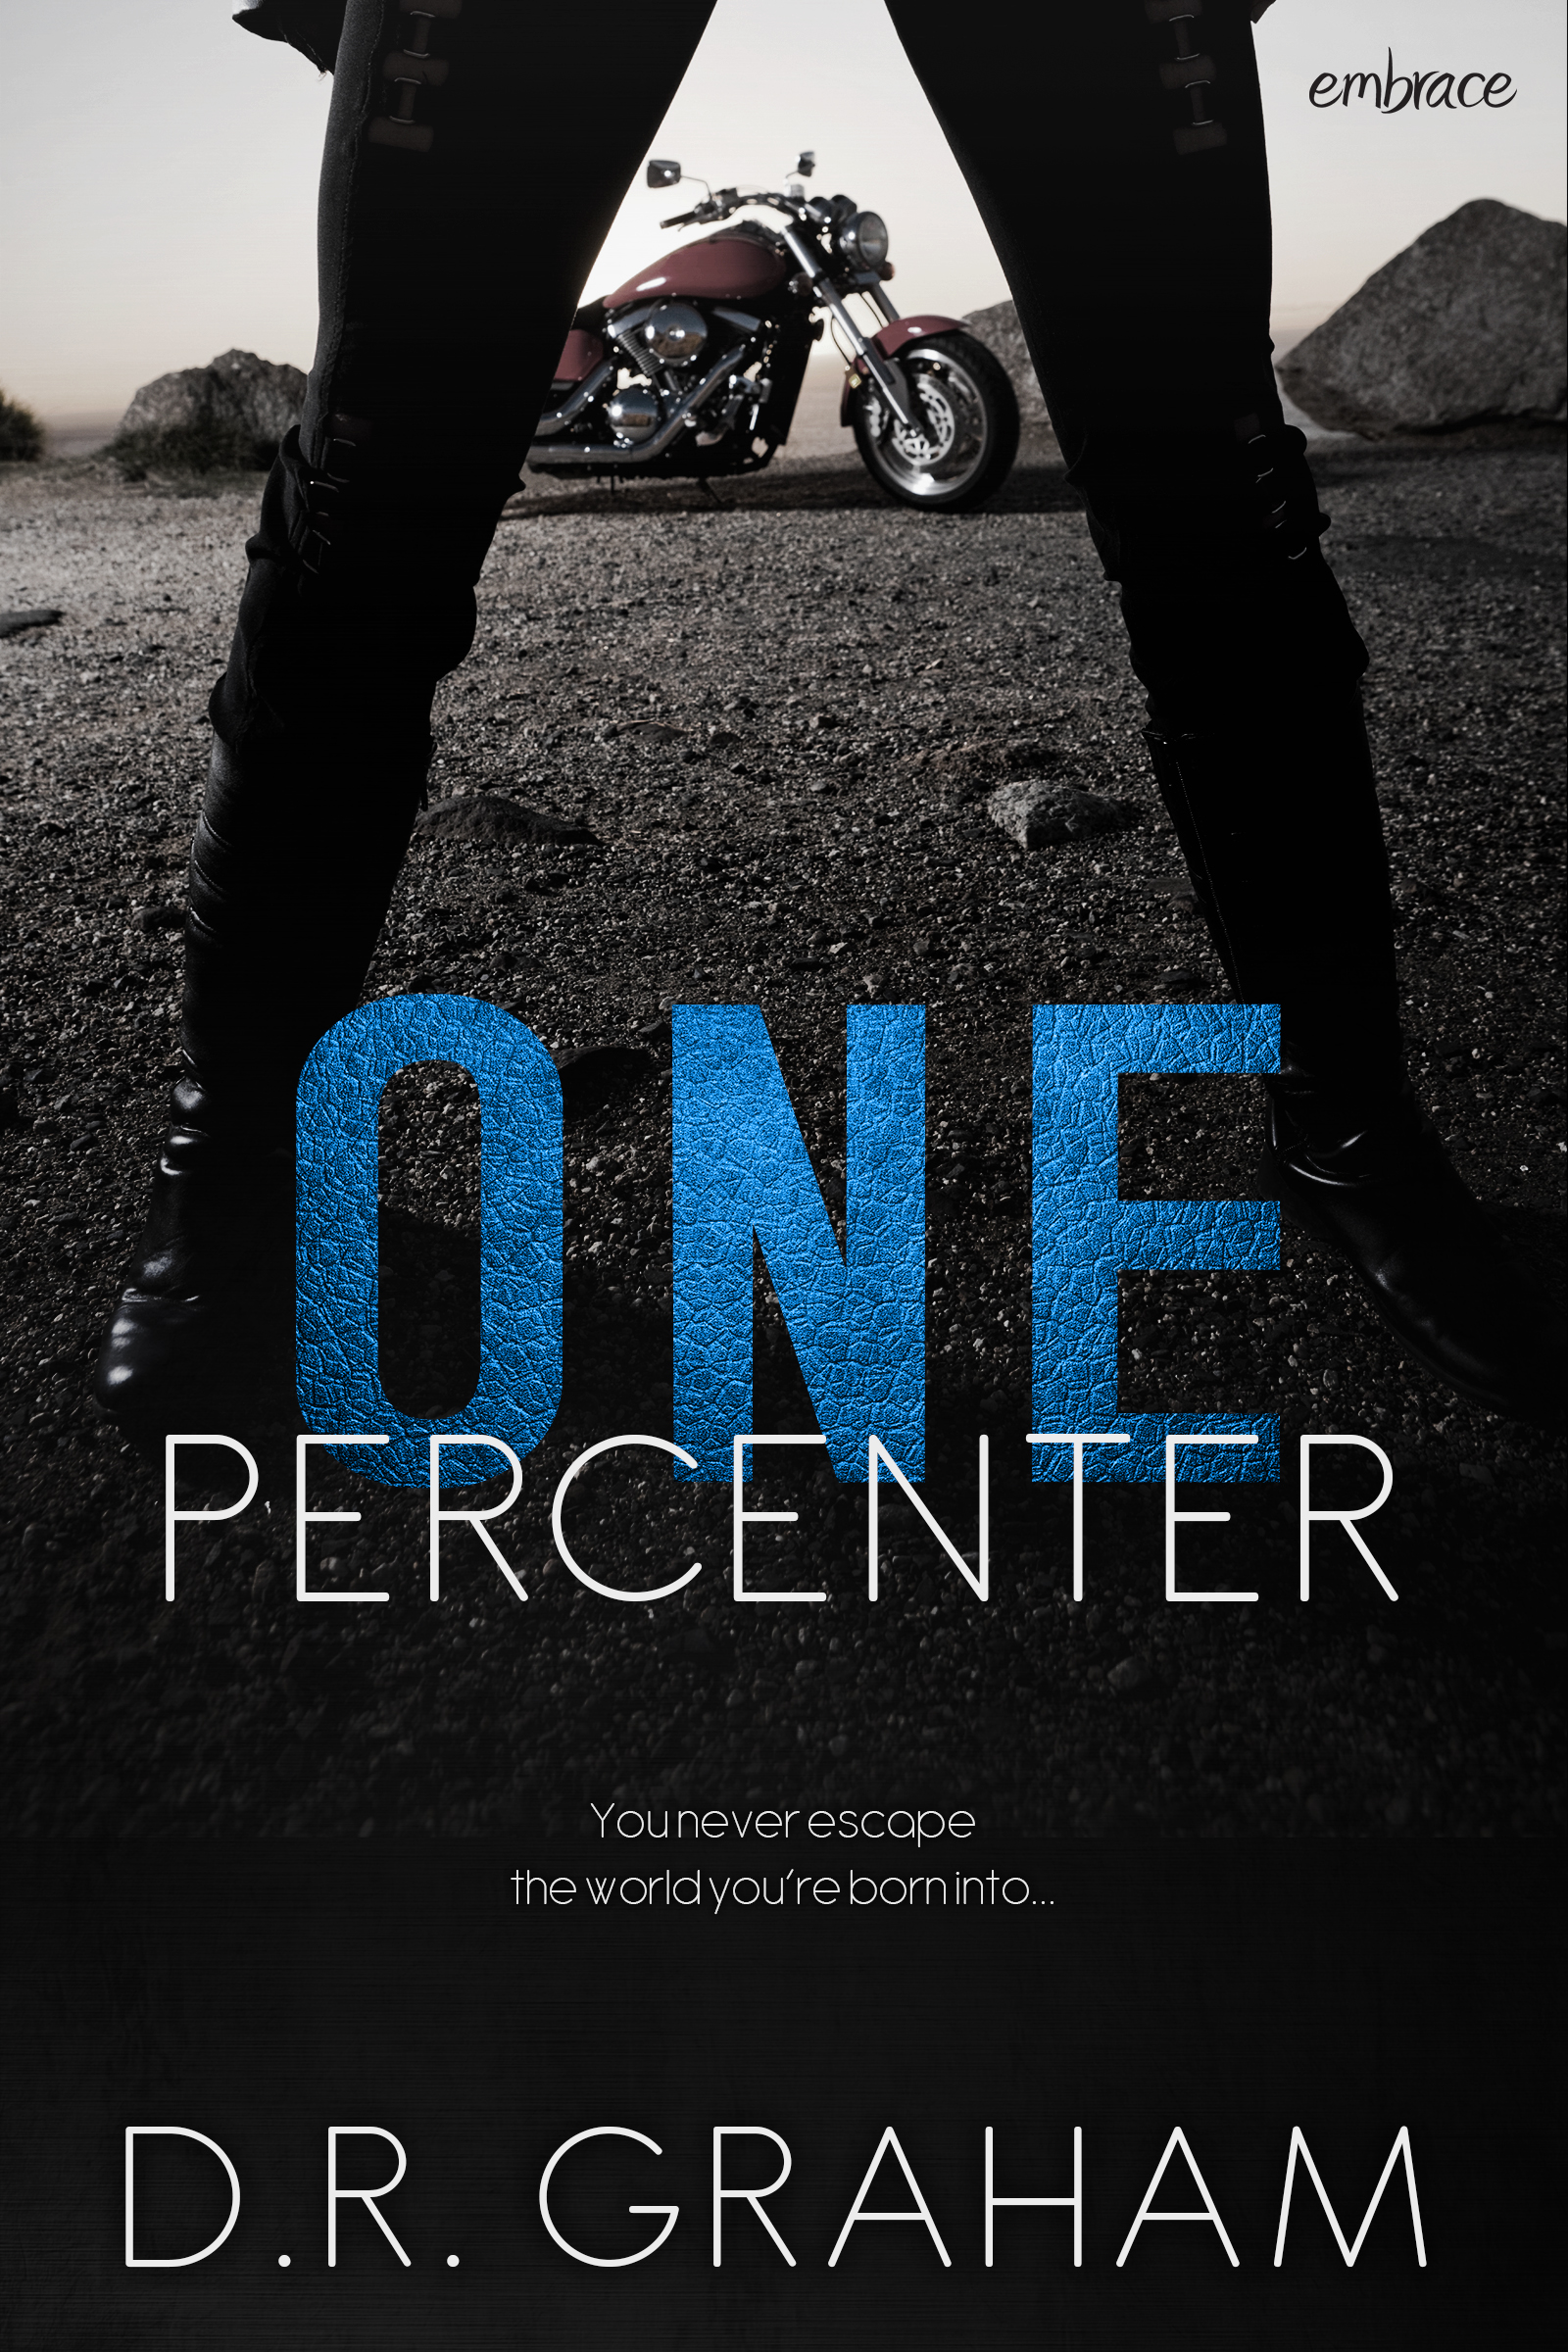 One Percenter by D.R. Graham